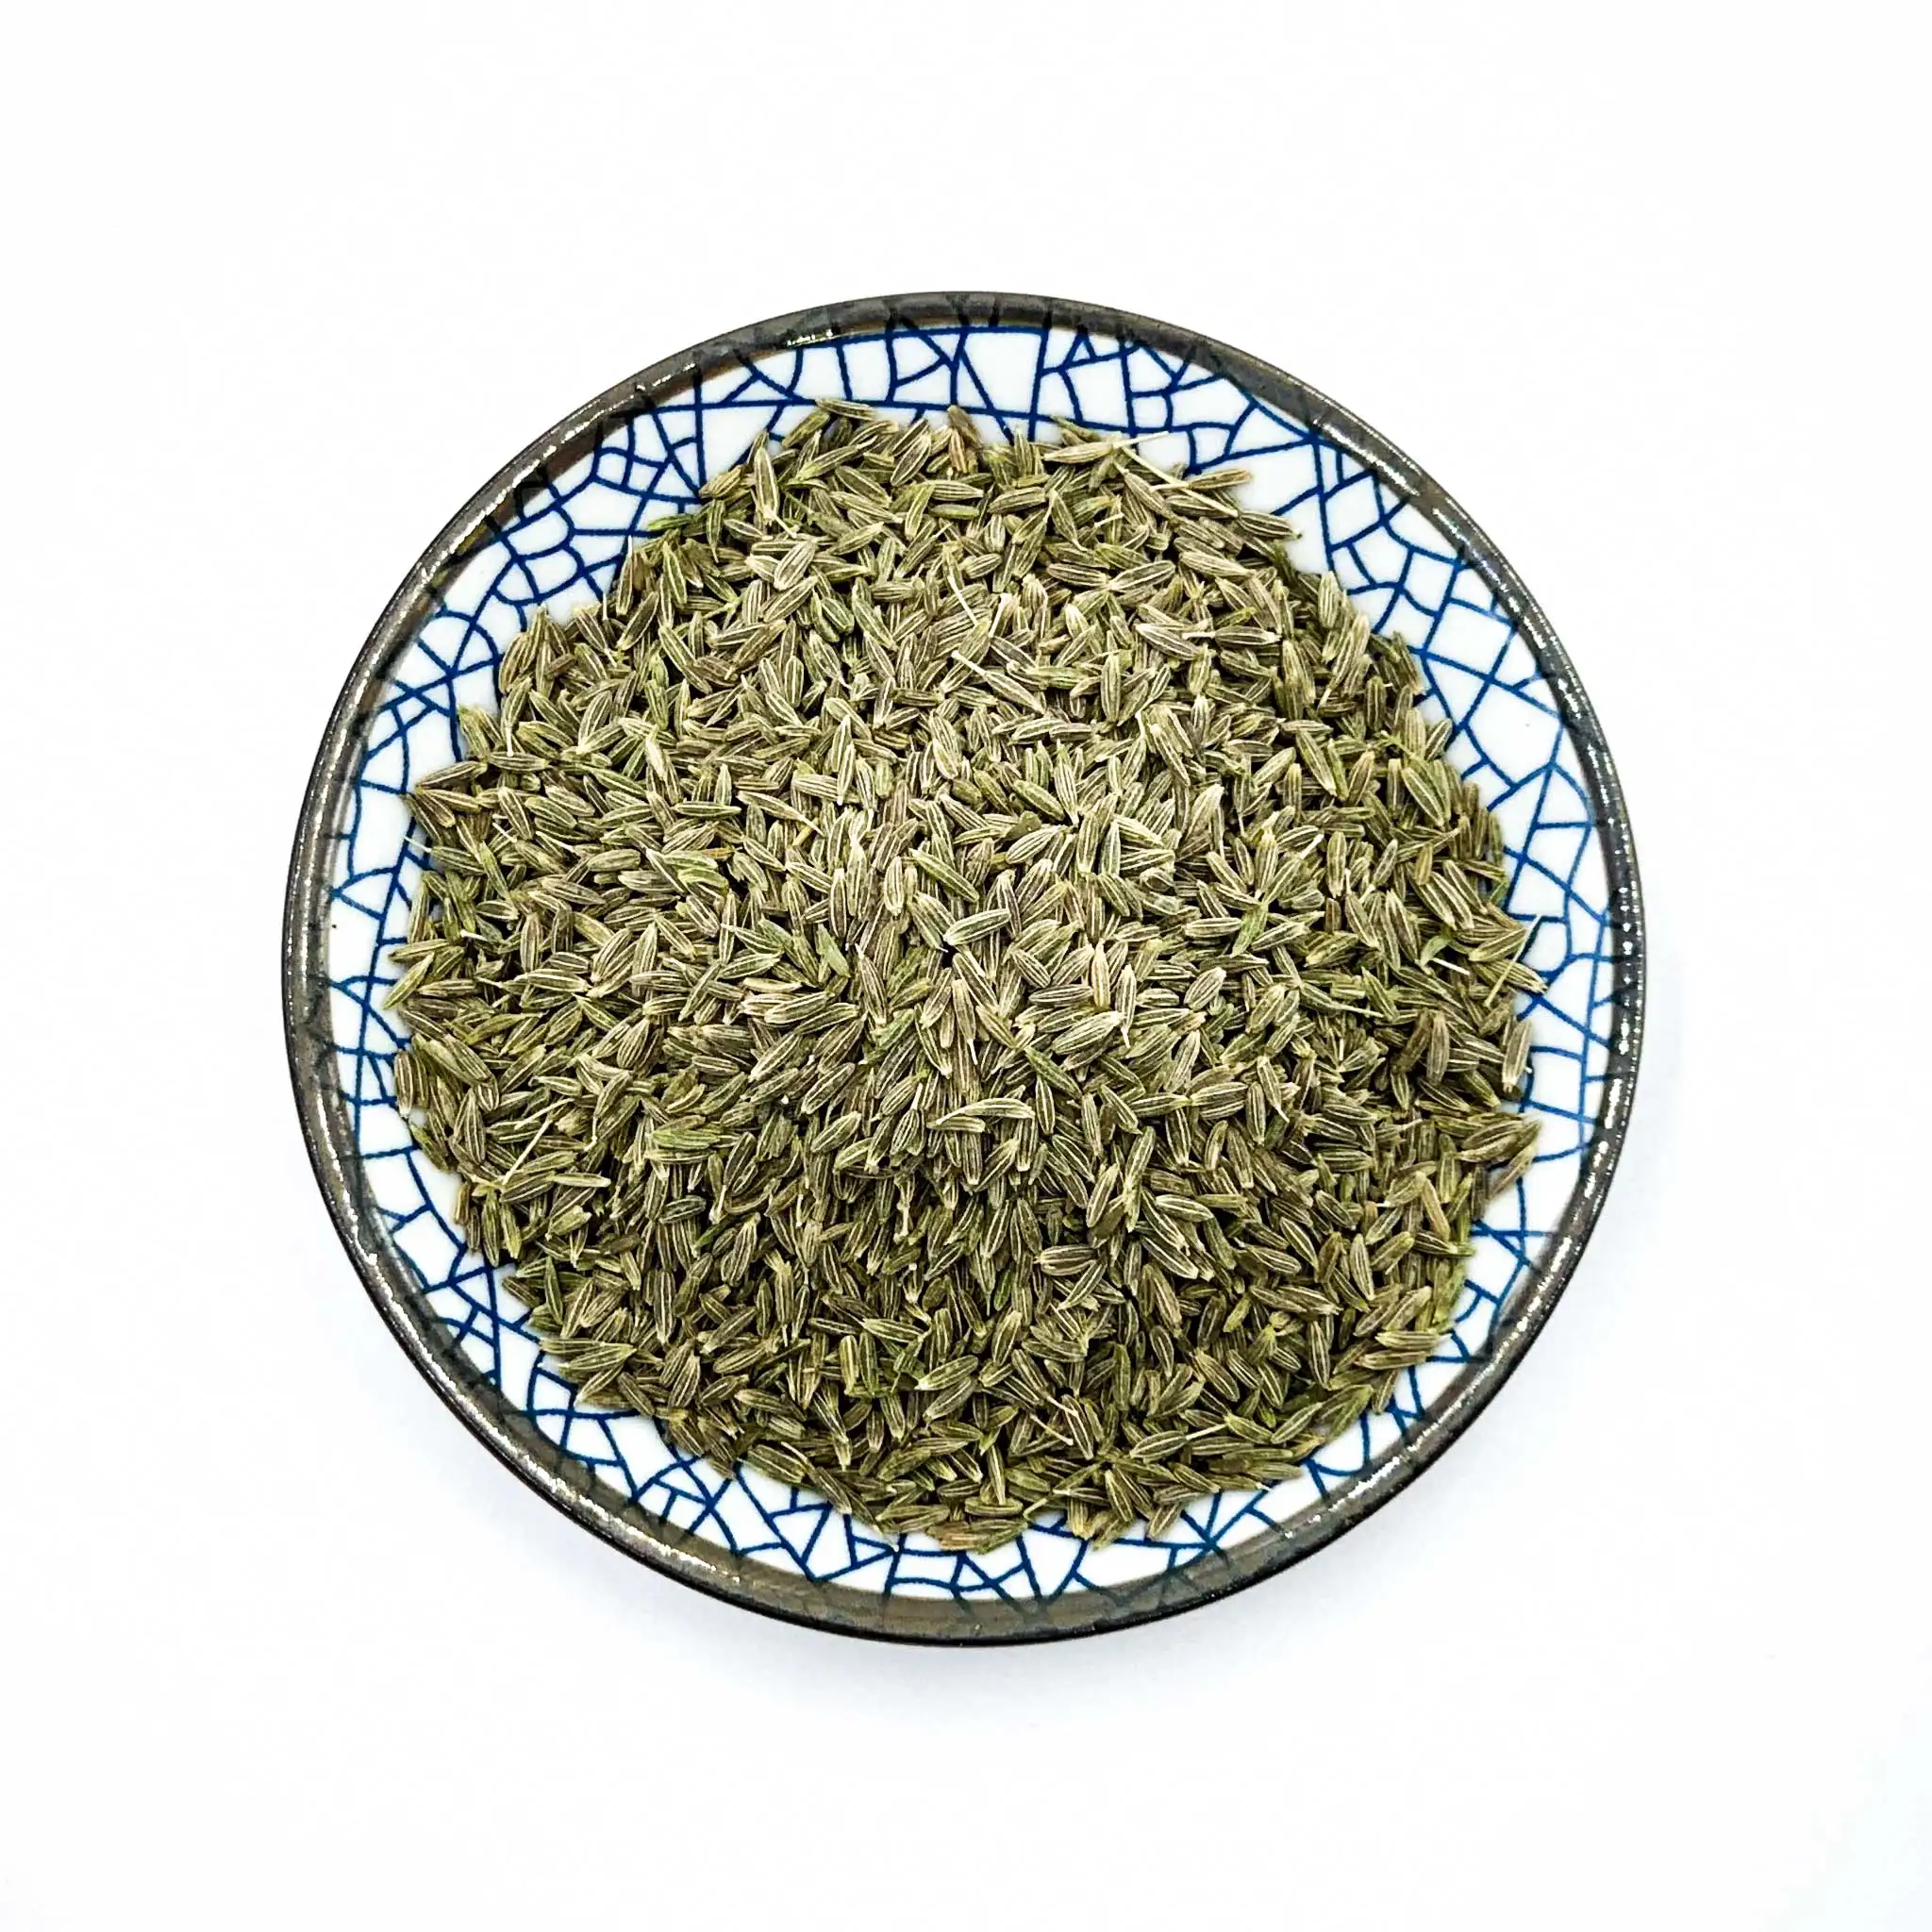 Factory directly sells high-quality cumin noir spices and exports cumin seeds